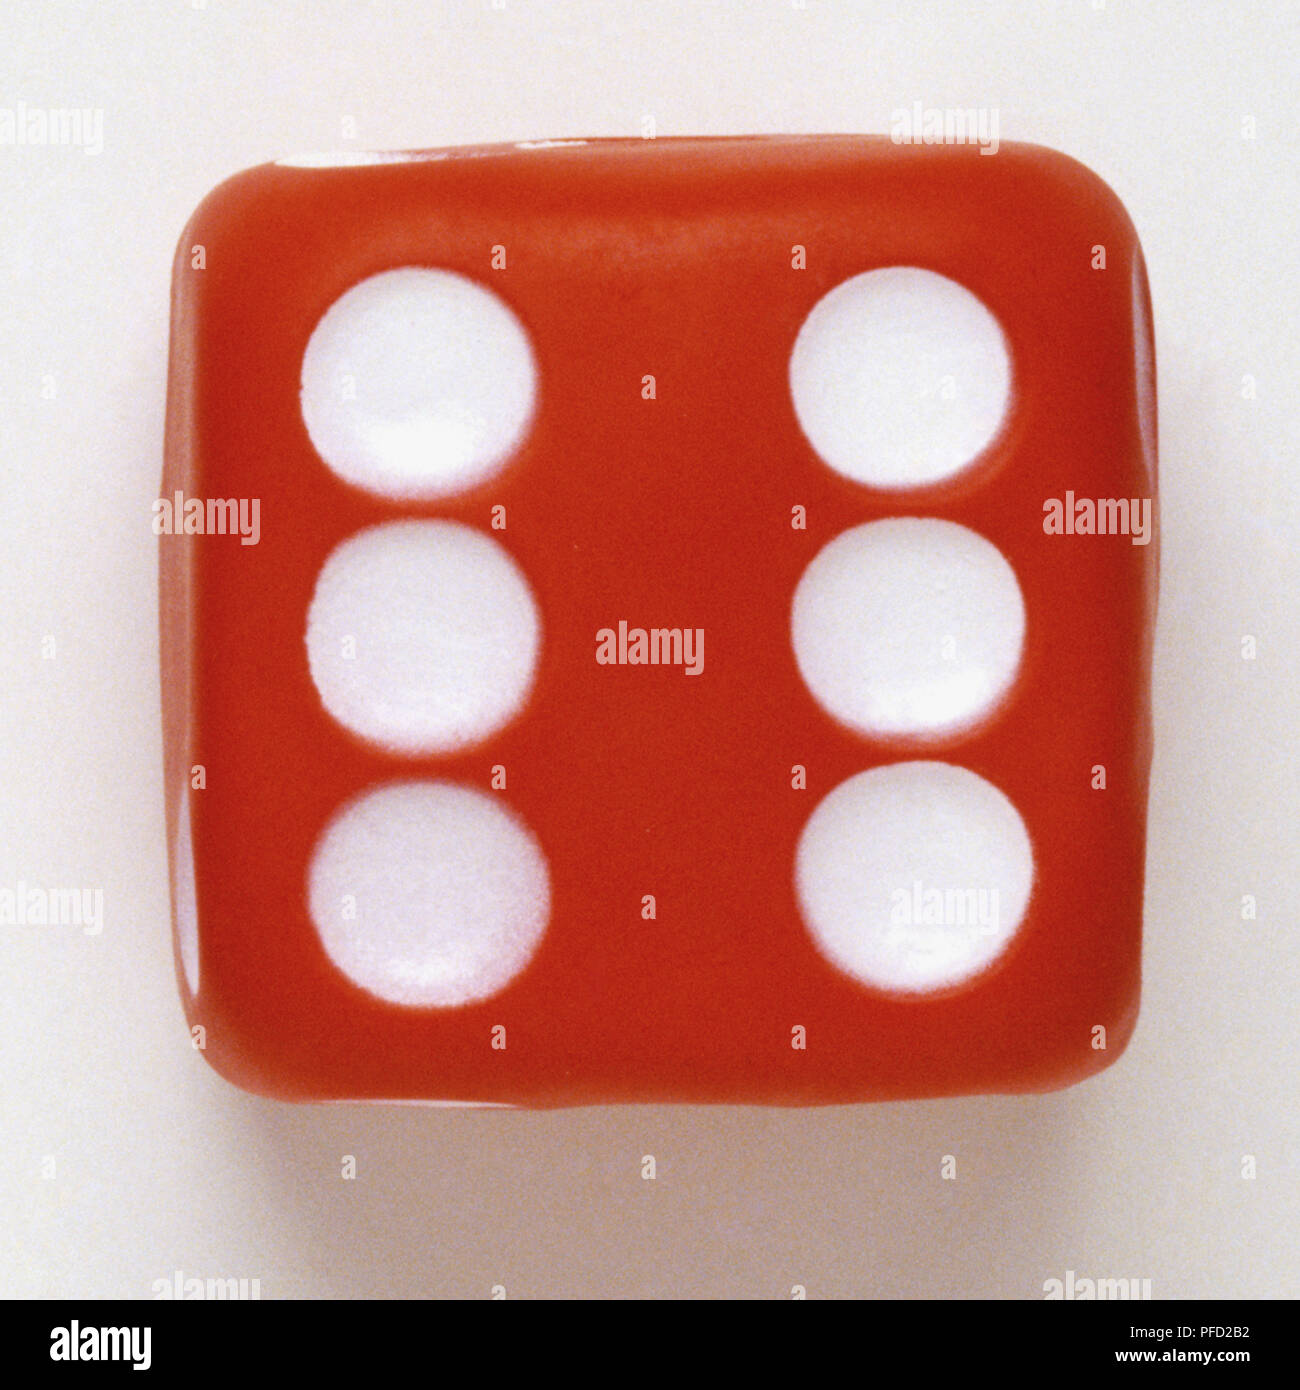 Red dice with white dots, close up Stock Photo